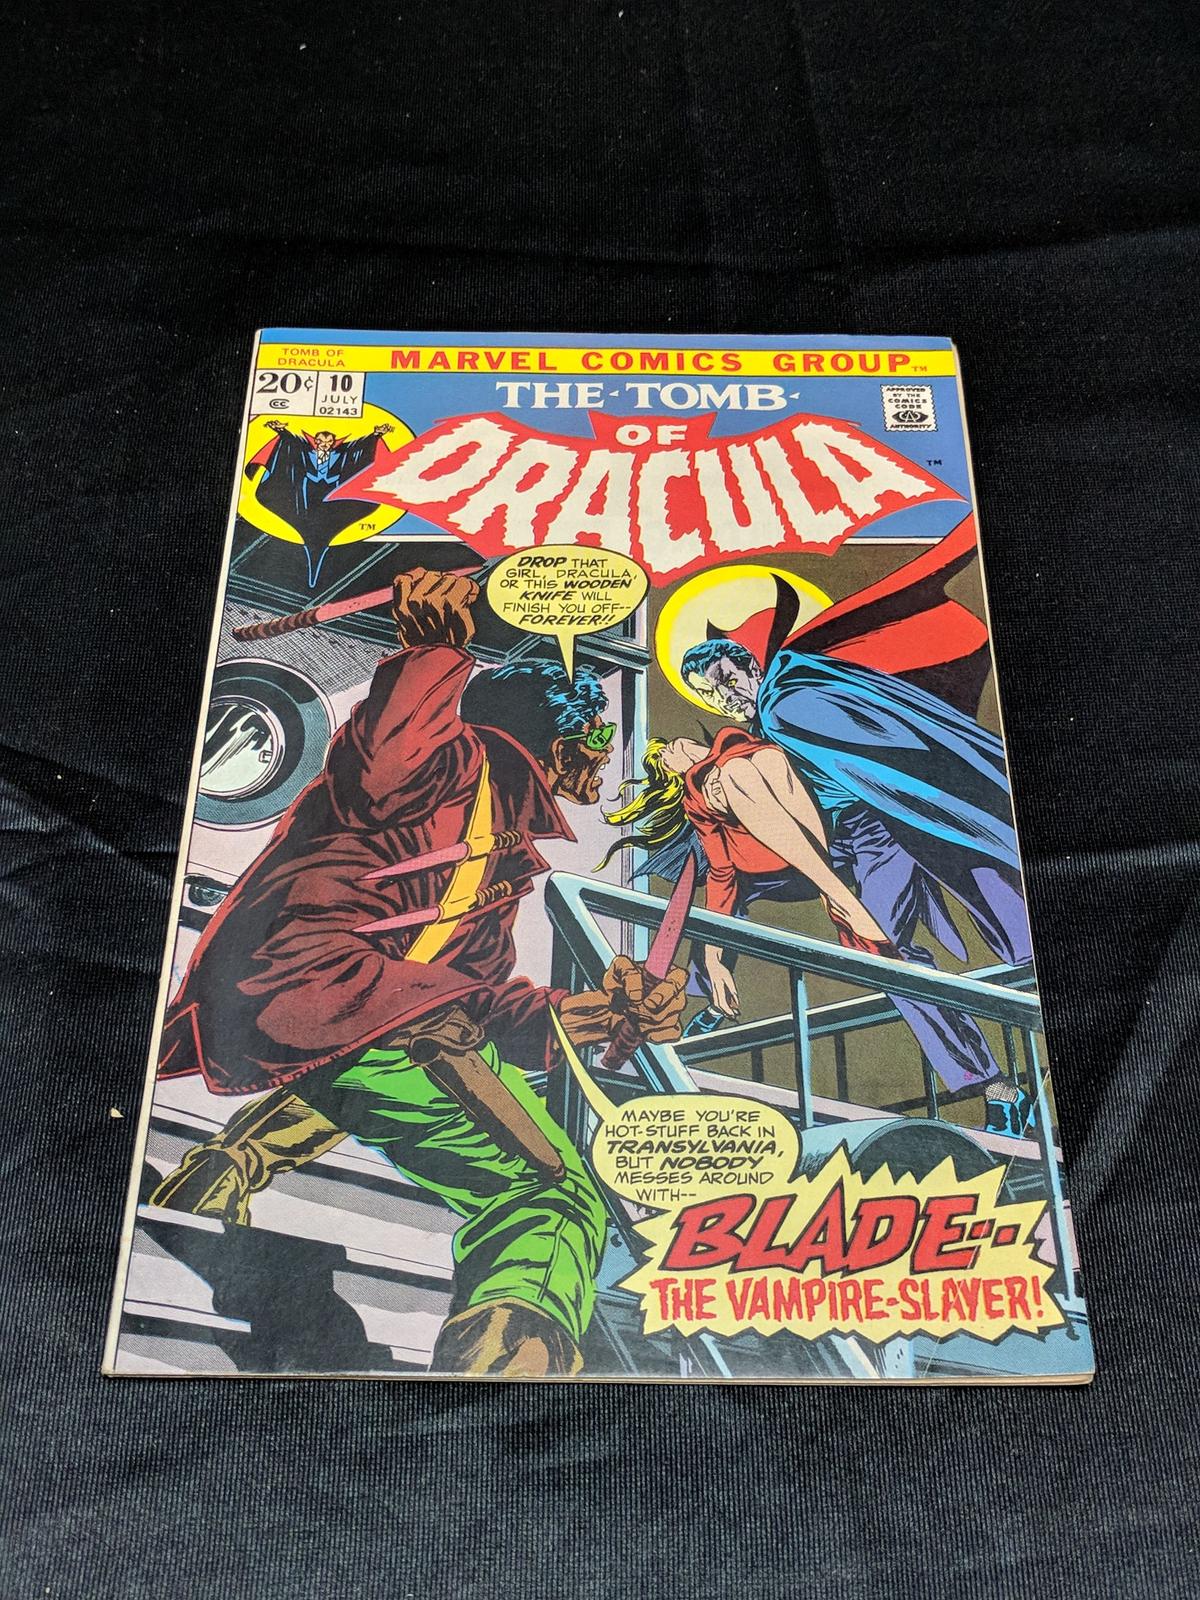 The Tomb of Dracula - 1 book - #10